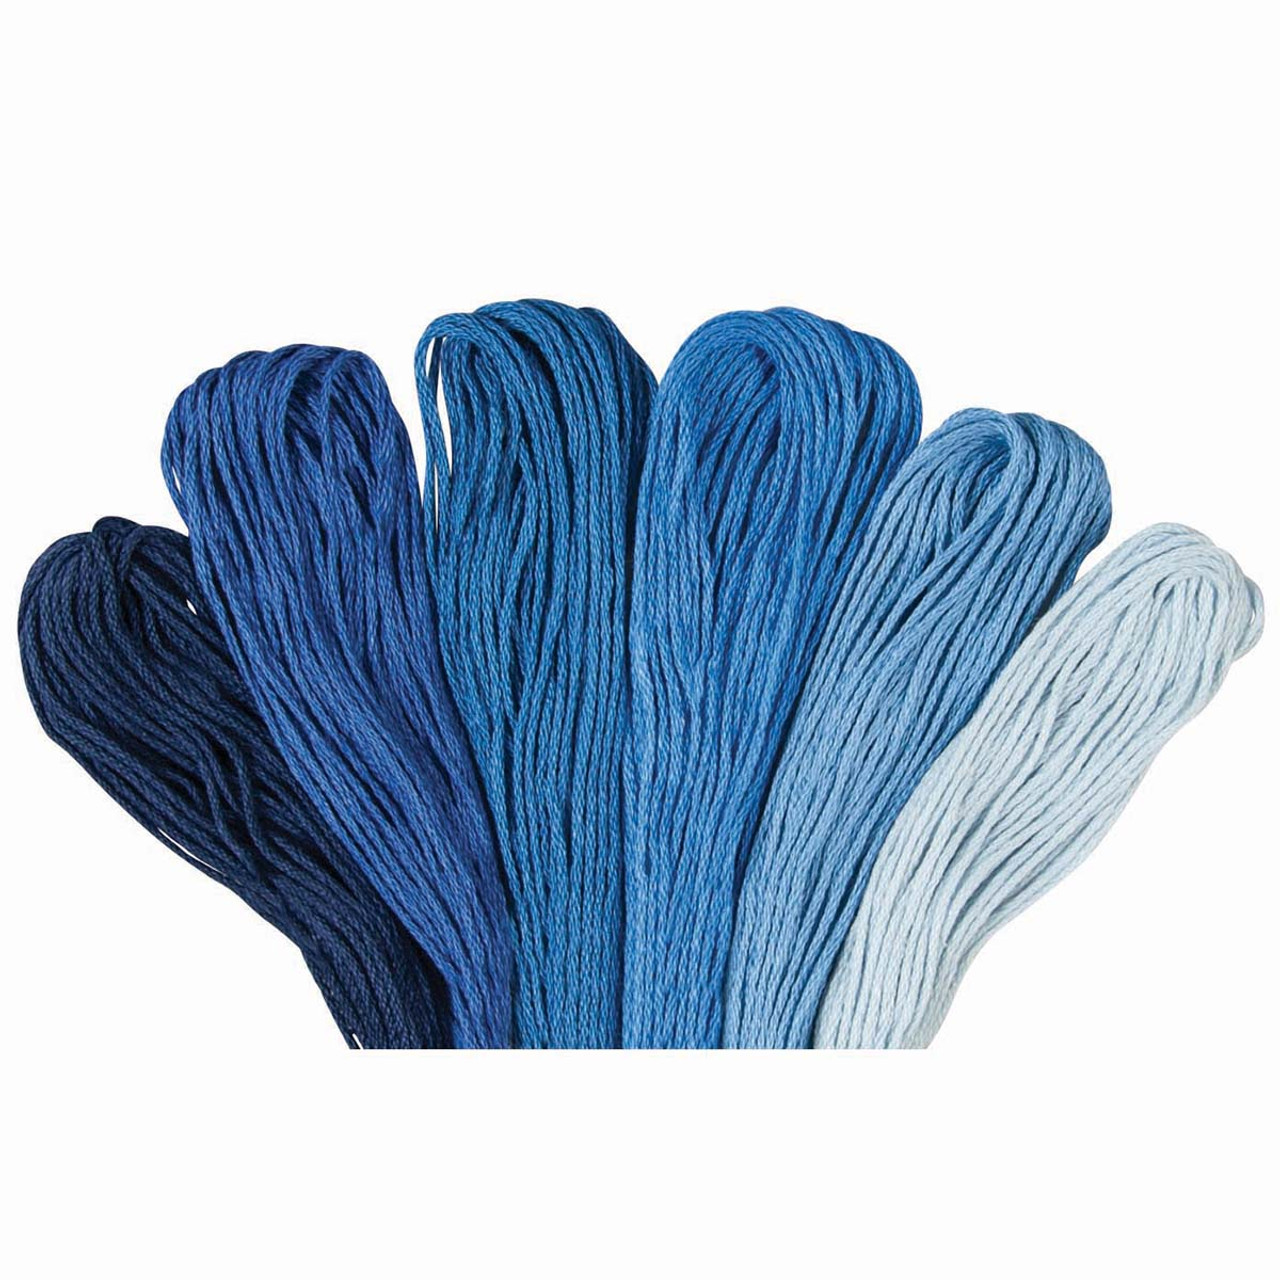 Craftways Embroidery Floss